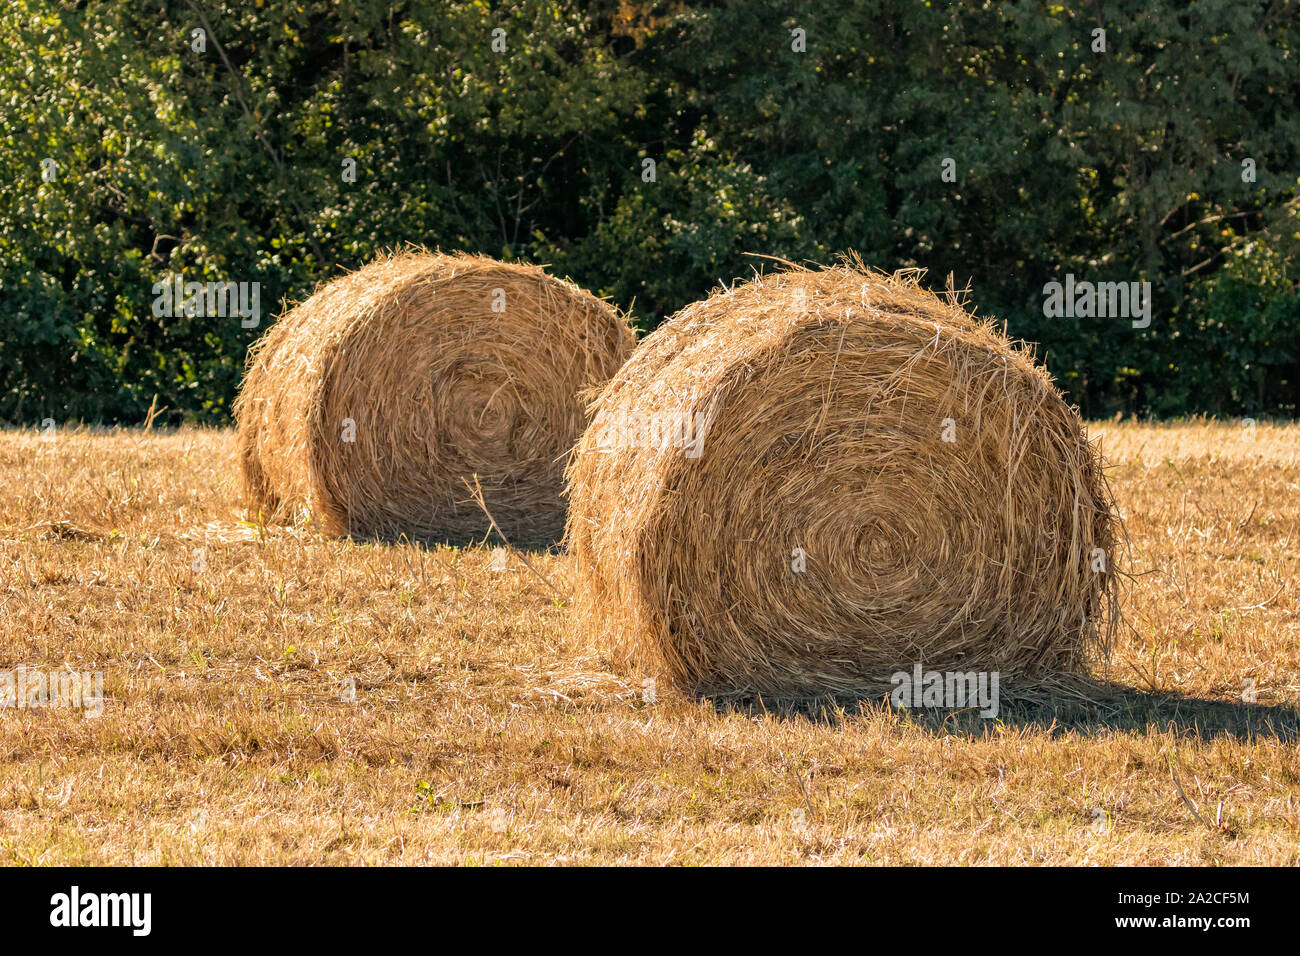 Recently baled, large round grass hay bales sitting in field on a sunny fall day with trees in background Stock Photo